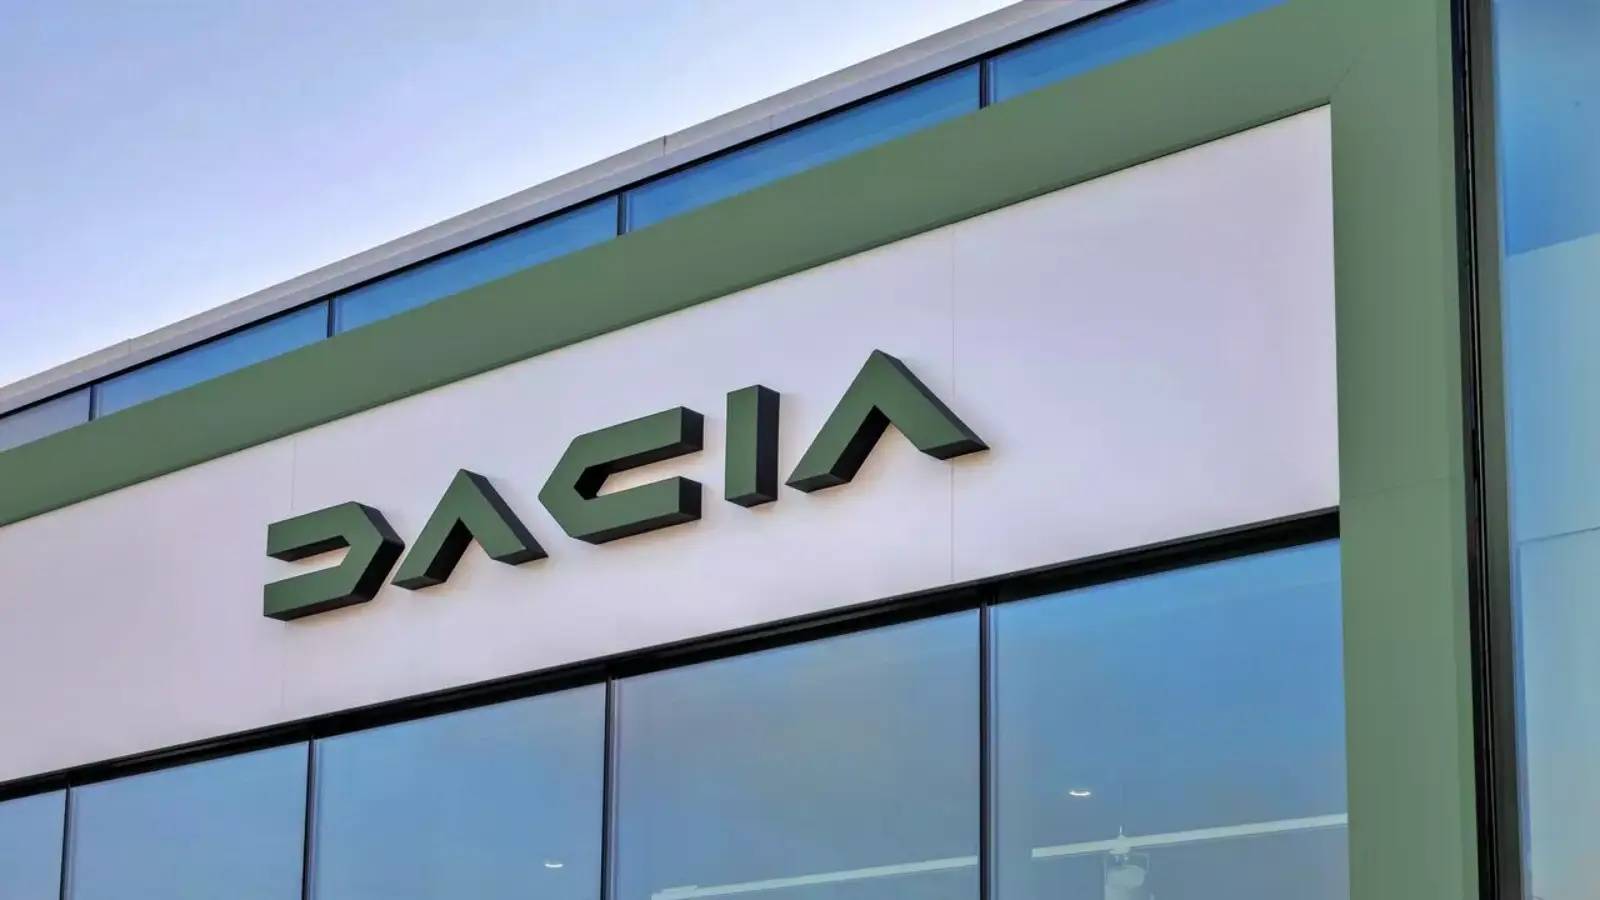 DACIA Launched New Products that SURPRISE Many Romanians